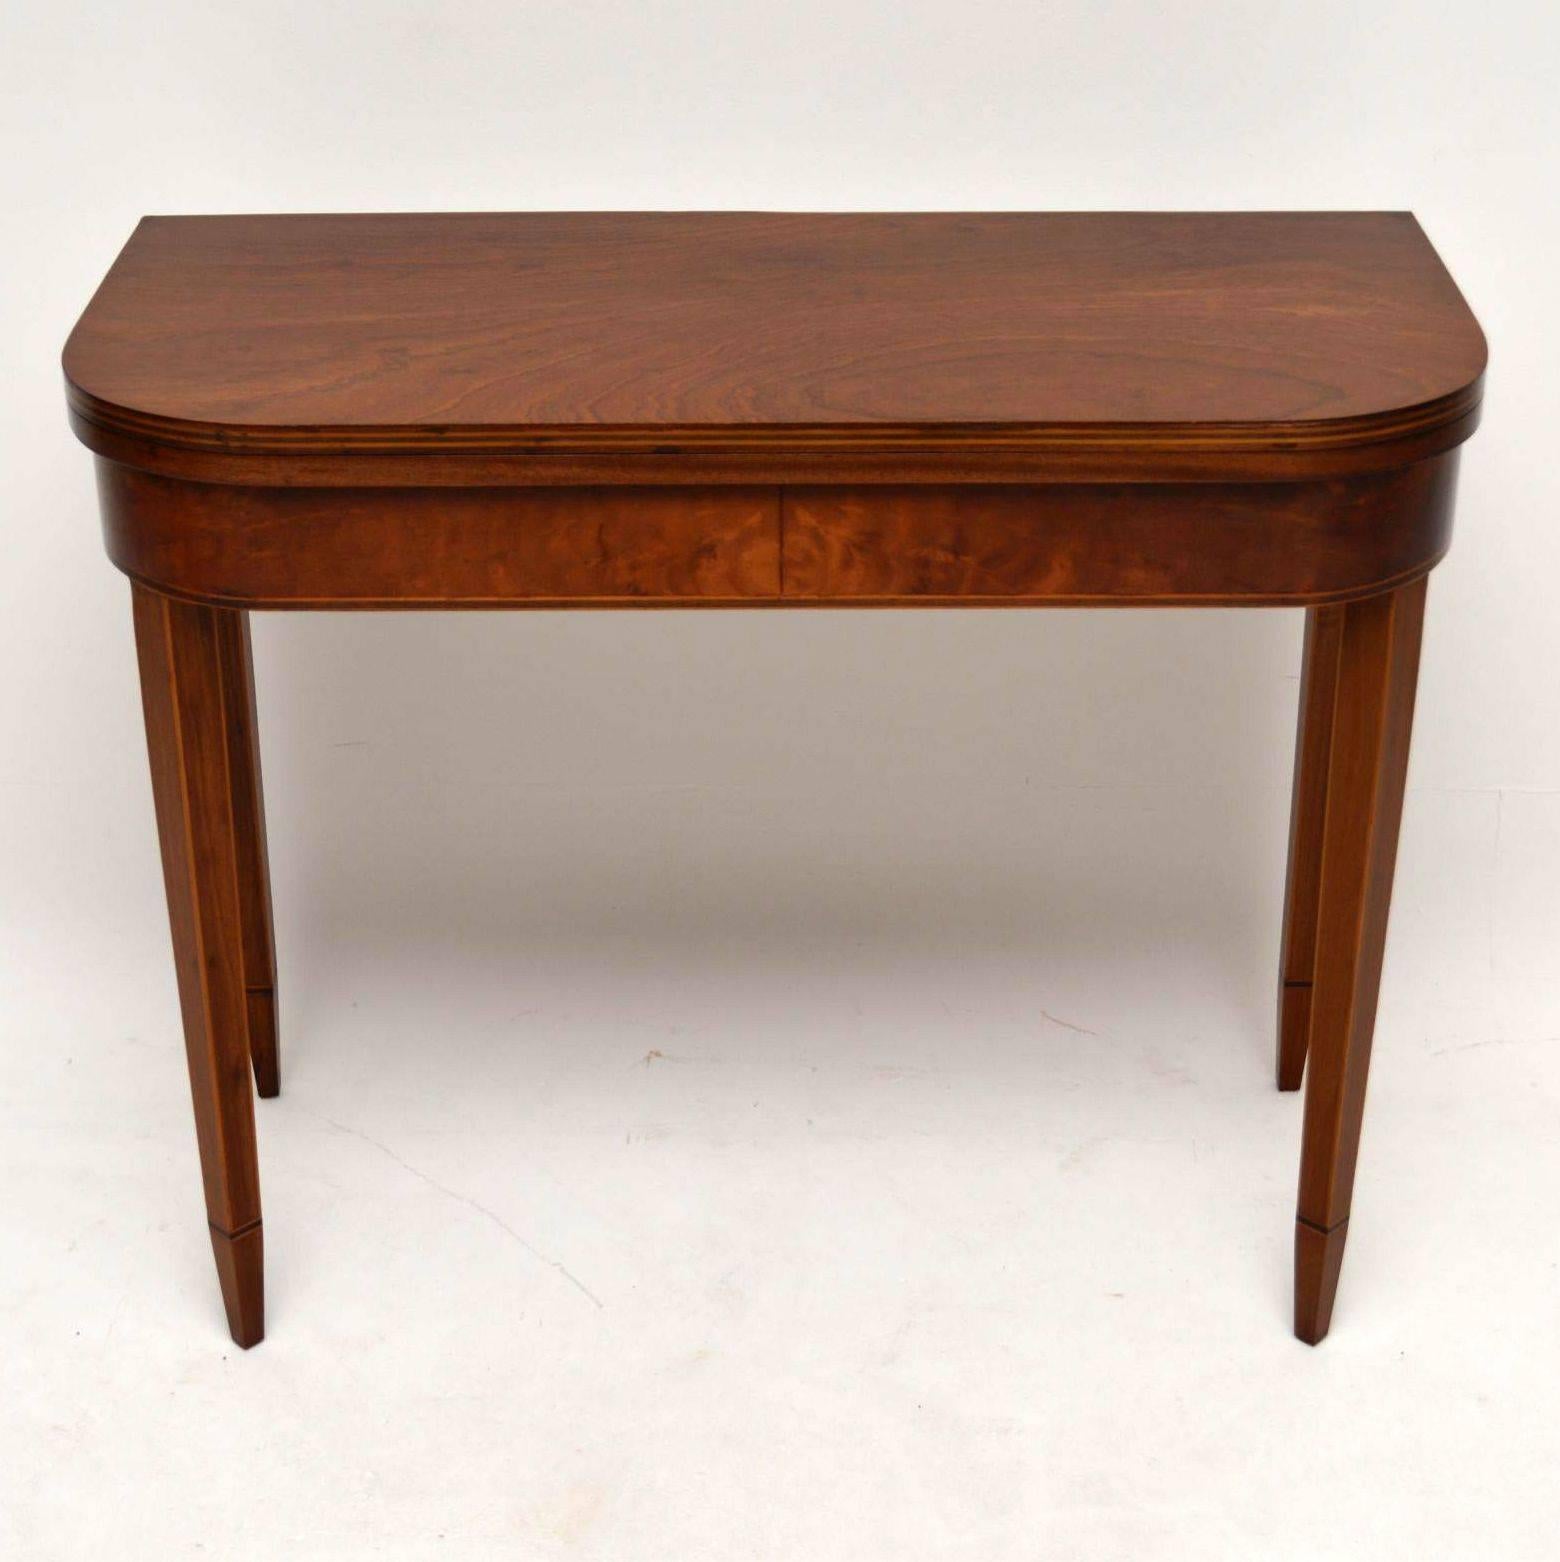 This card table is a good quality reproduction of a period George III piece and probably made around the 1950s period. It's mahogany with satinwood inlay and is in excellent condition having just been re-polished. The top opens up & is supported